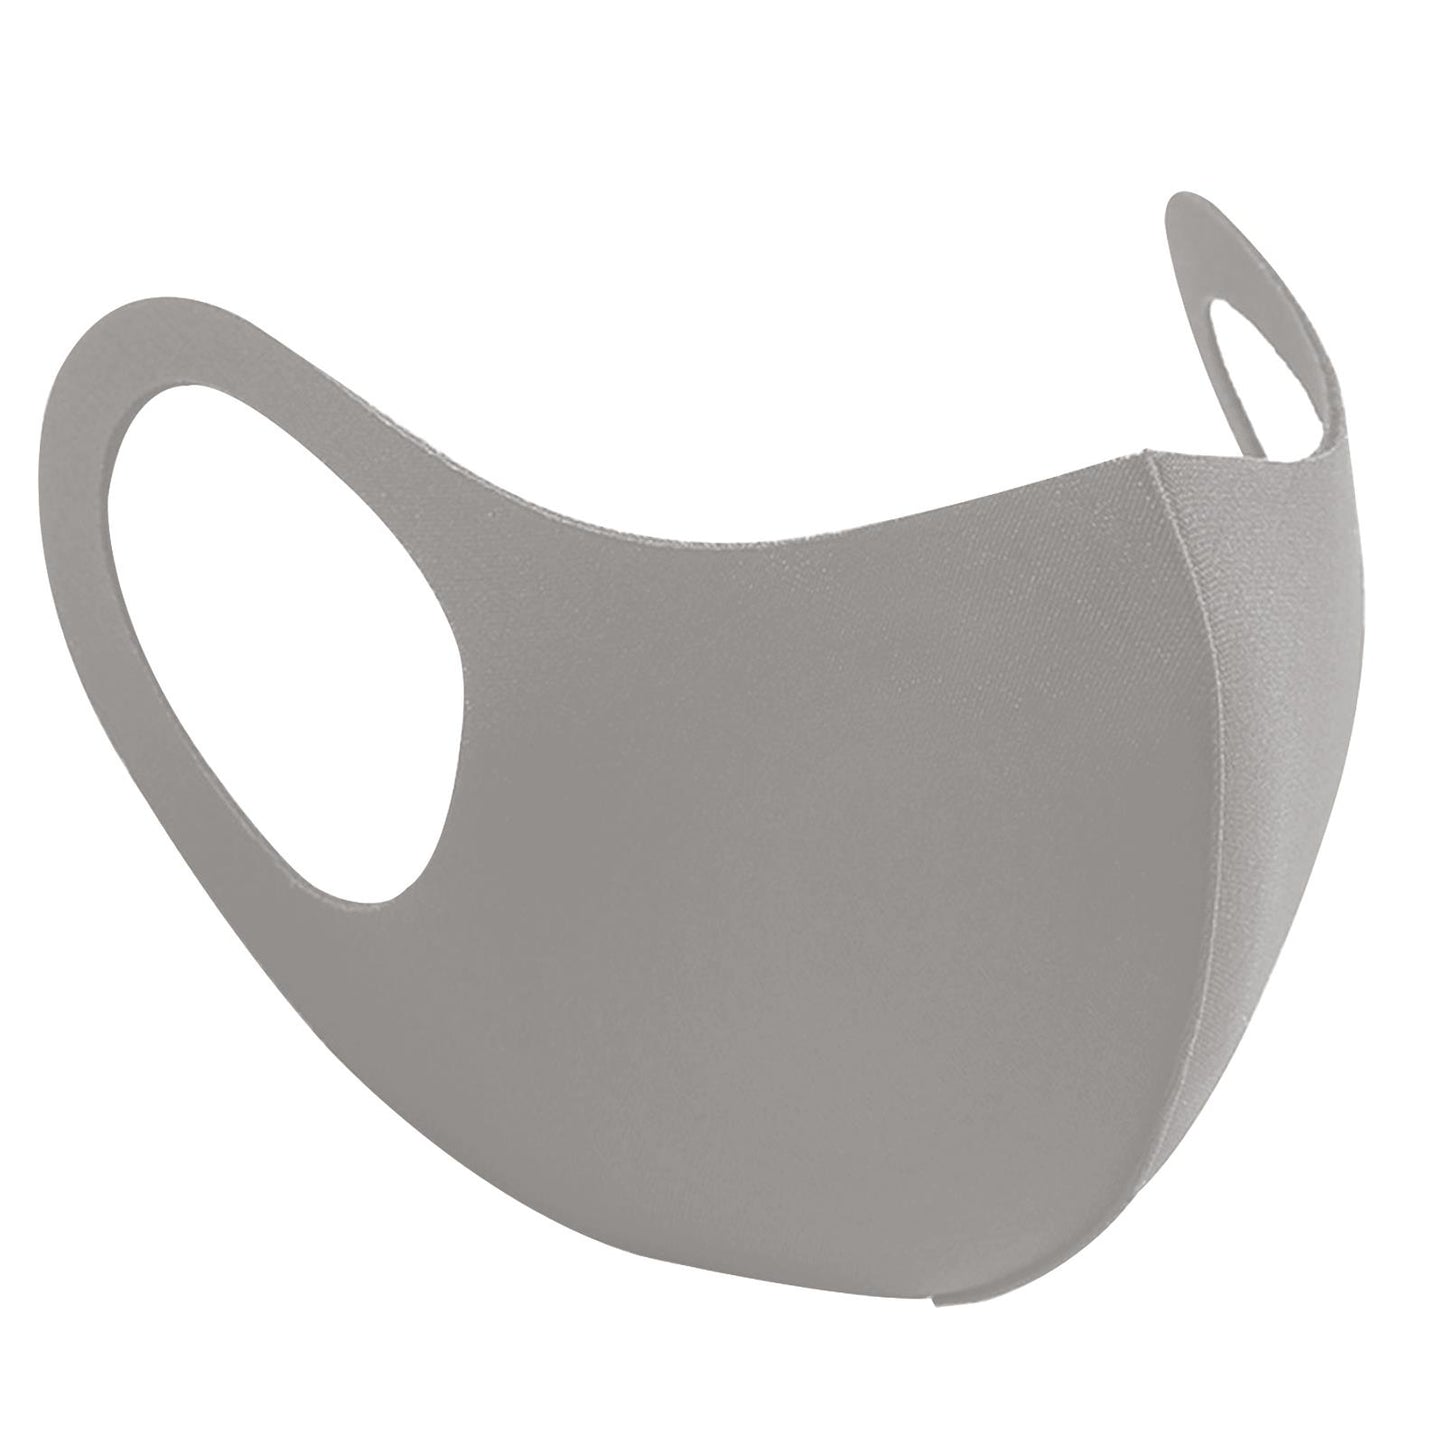 Grey Reusable Face Mask With Adjustable Ear Loops And Washable Fabric